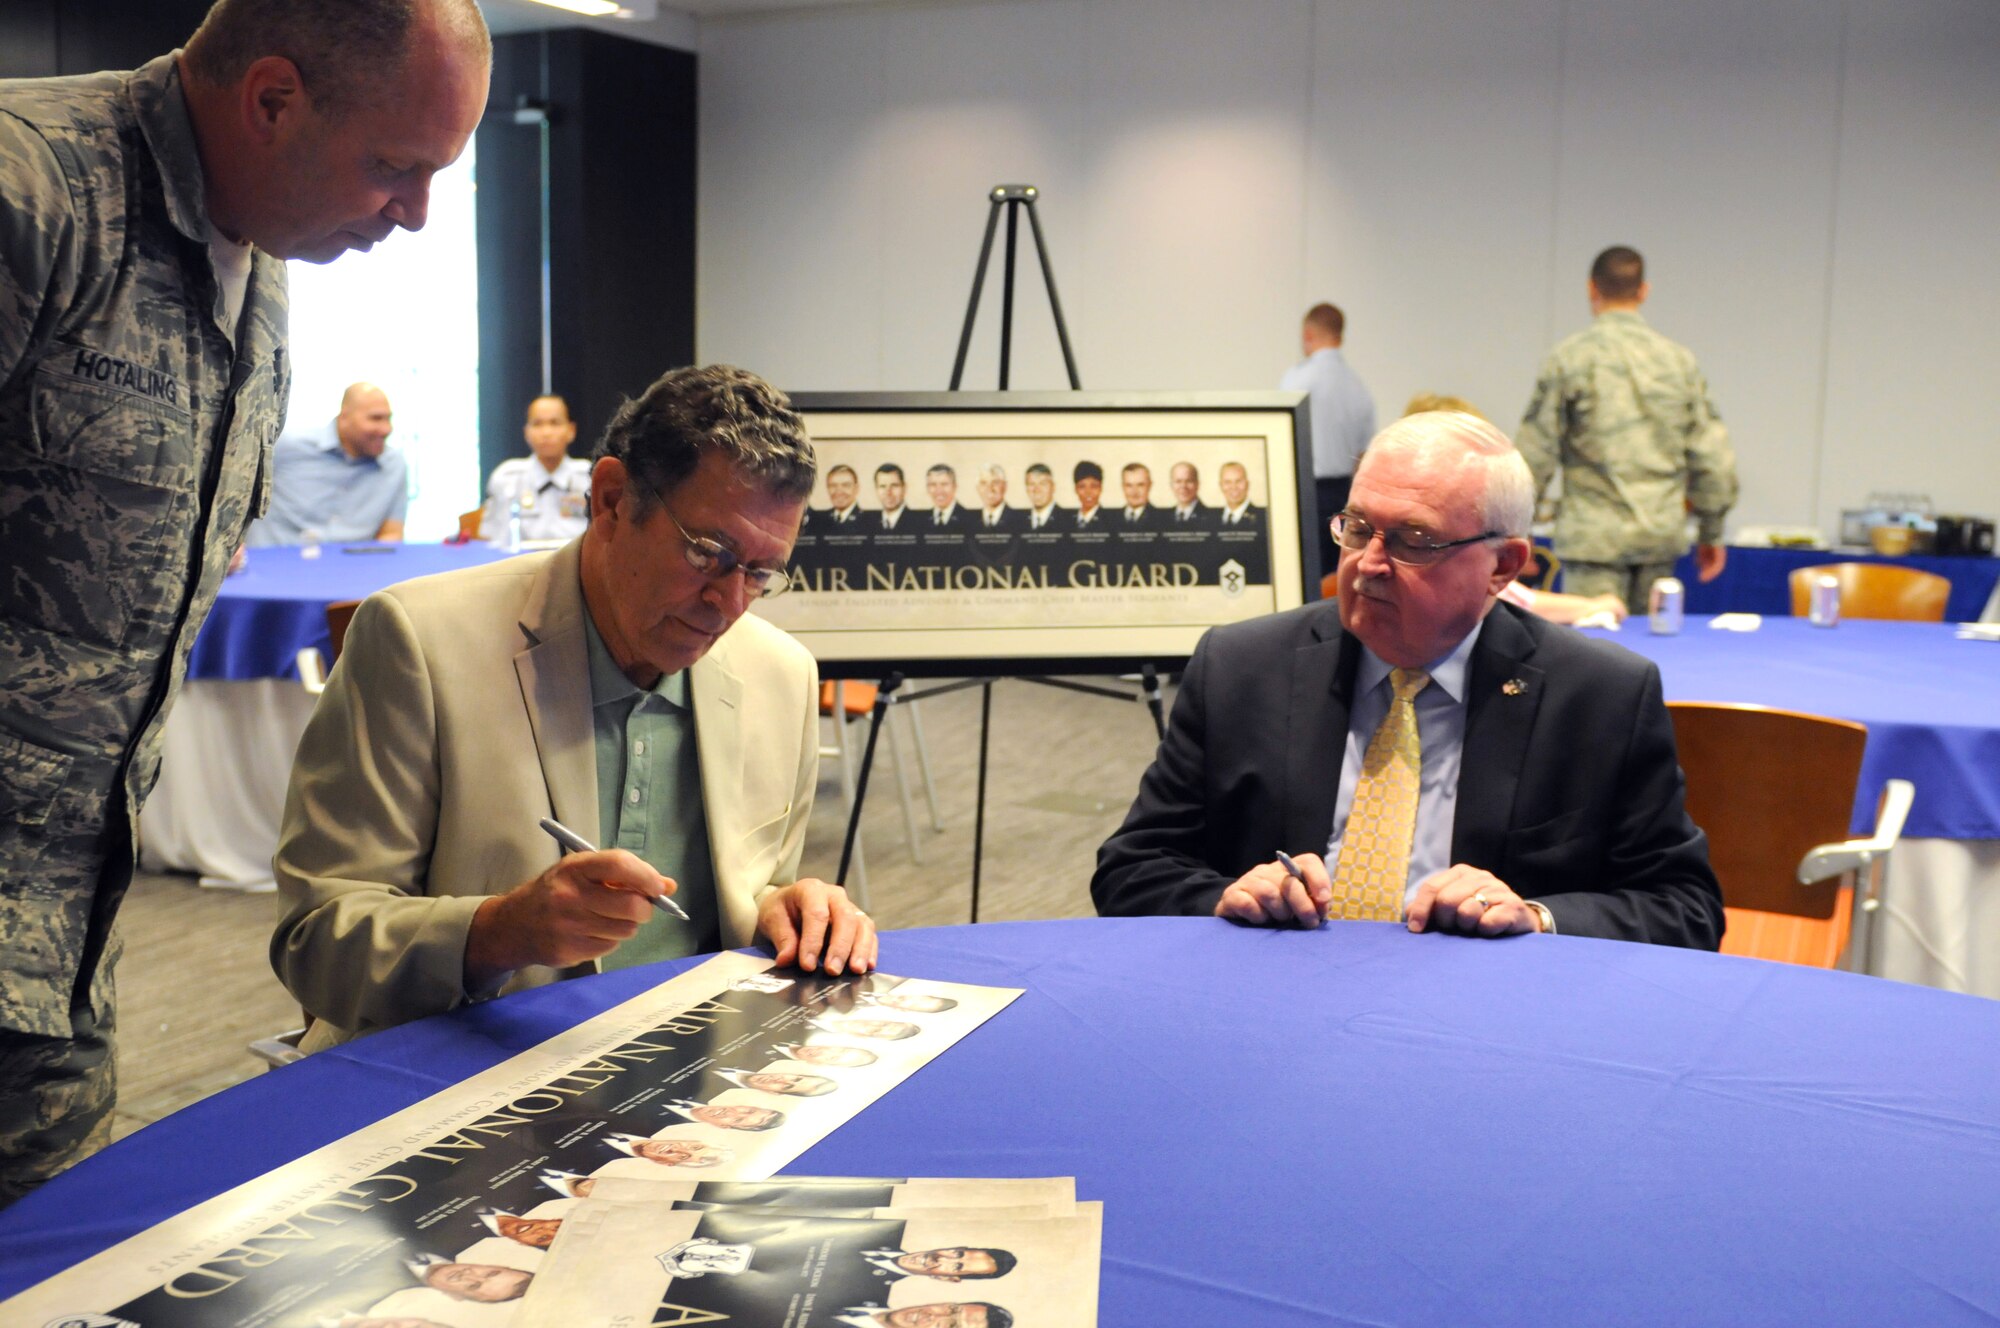 Retired Chief Master Sgt. Lynn E. Alexander, former Senior Enlisted Leader to the director of the Air National Guard, center, signs the formers heritage painting lithograph as Chief Master Sgt. James W. Hotaling, command chief master sergeant of the Air National Guard and retired Chief Master Sgt. Richard Smith, former command chief master sergeant of the Air National Guard observe. The lithograph was released as part of the ANG's Focus on the Force week, which gathers senior enlisted leadership to highlight the importance of professional development at all levels, receive feedback from junior enlisted Airmen, and tell the exceptional stories of ANG Airmen throughout the 50 states, territories, and the District of Columbia. (U.S. Air National Guard photo by Master Sgt. David Eichaker/released)